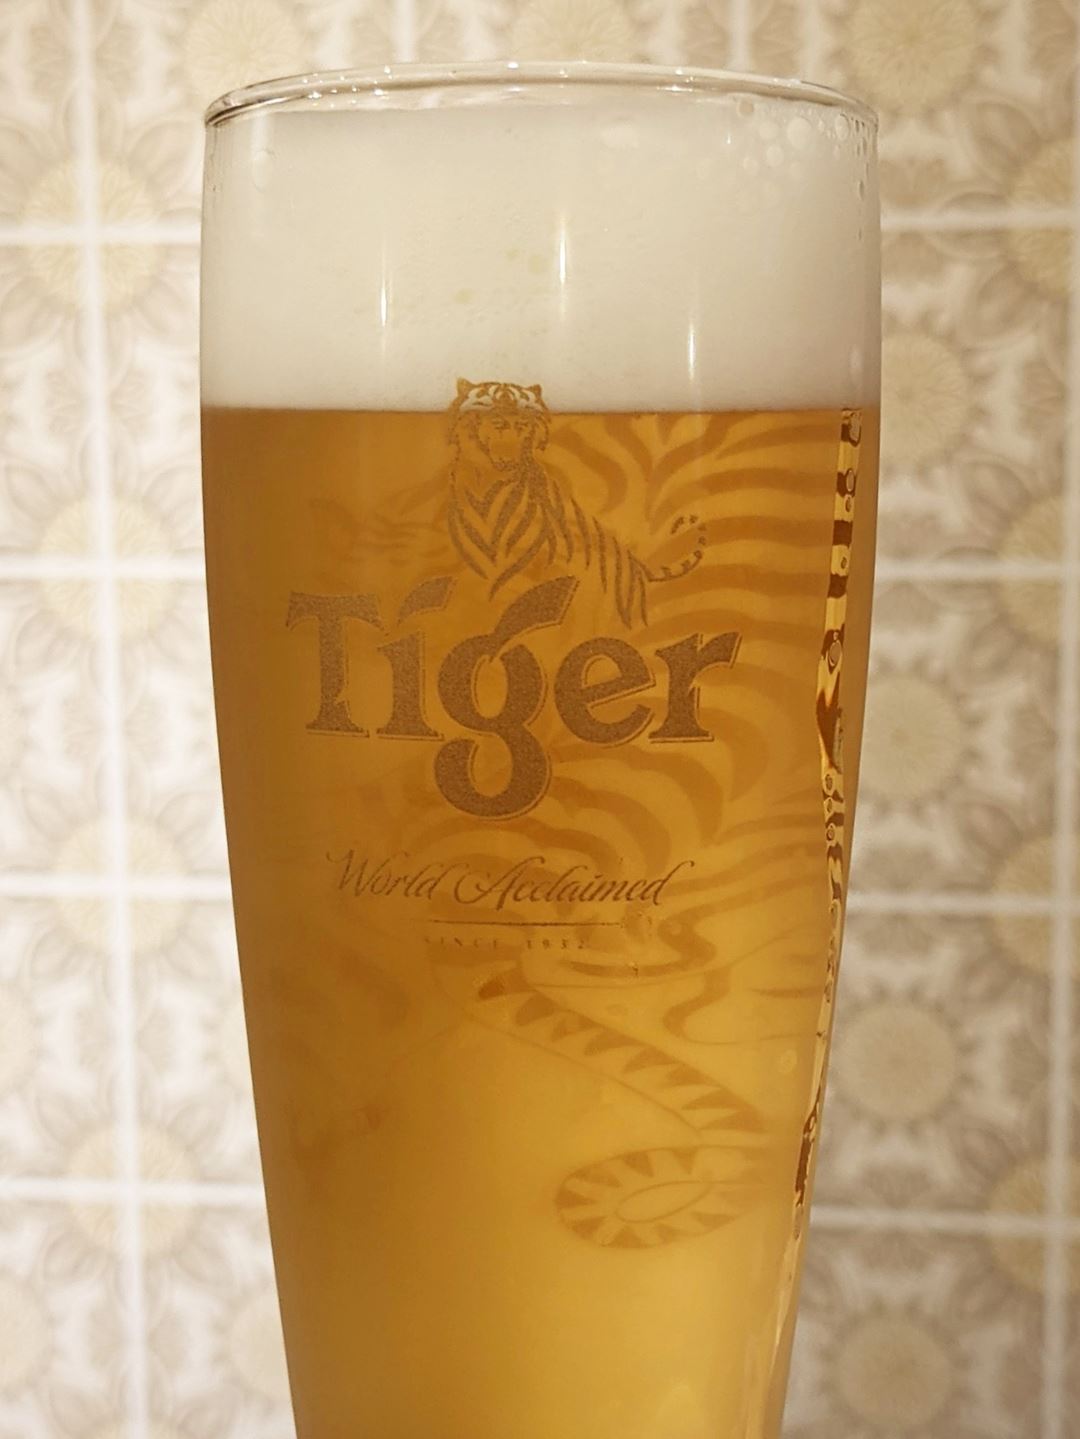 Tiger Beer タイガービール Singaporean Cafe and Bar LITTLE MERLION シンガポール カフェバー リトルマーライオン in Tokyo Japan 東京 足立区 西新井